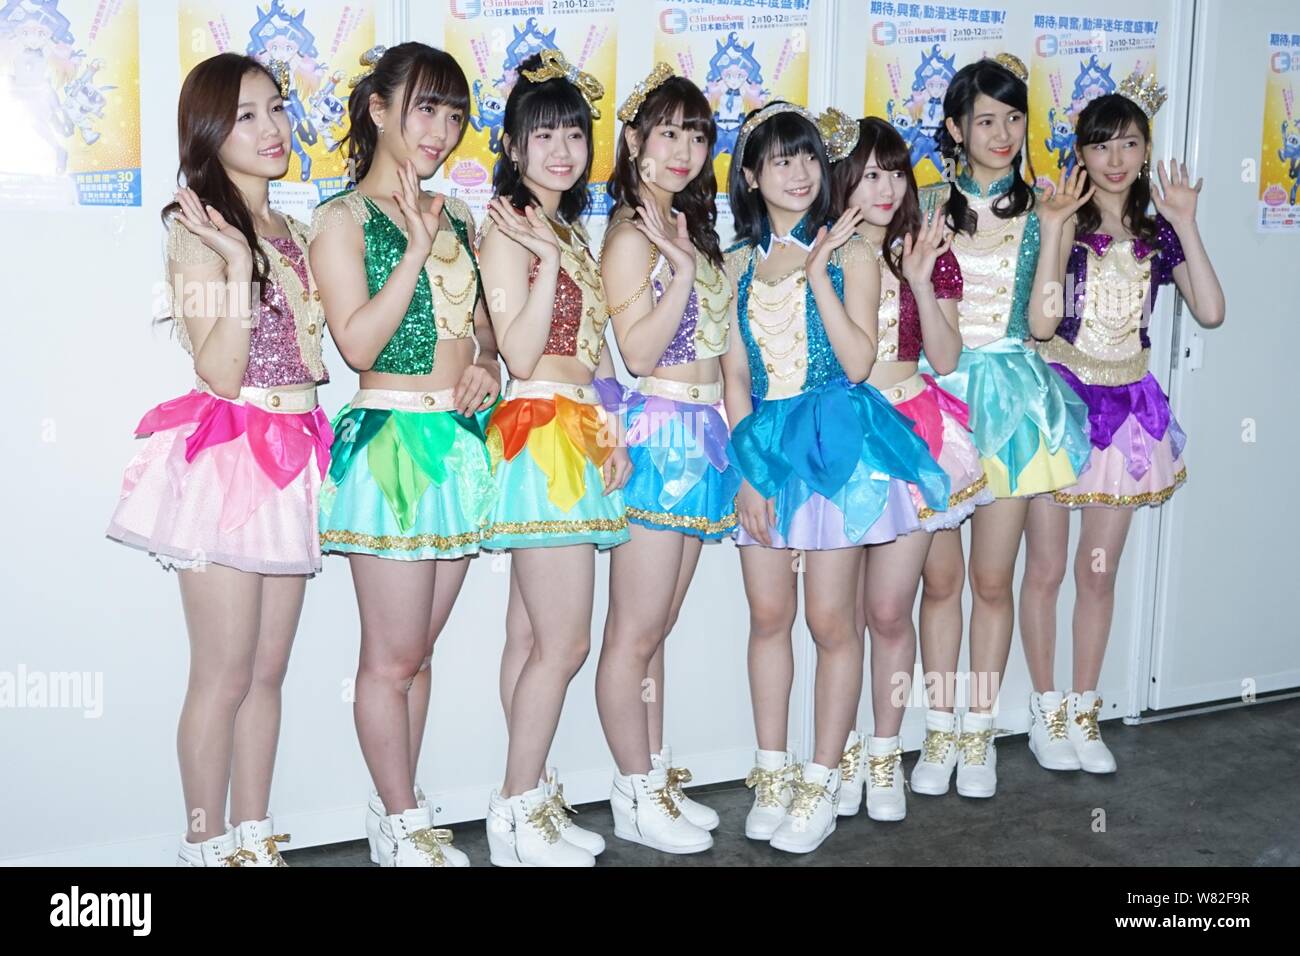 Members of Japanese idol girl group SKE48 pose during the 2017 'C3 X HOBBY' expo in Hong Kong, China, 10 February 2017. Stock Photo